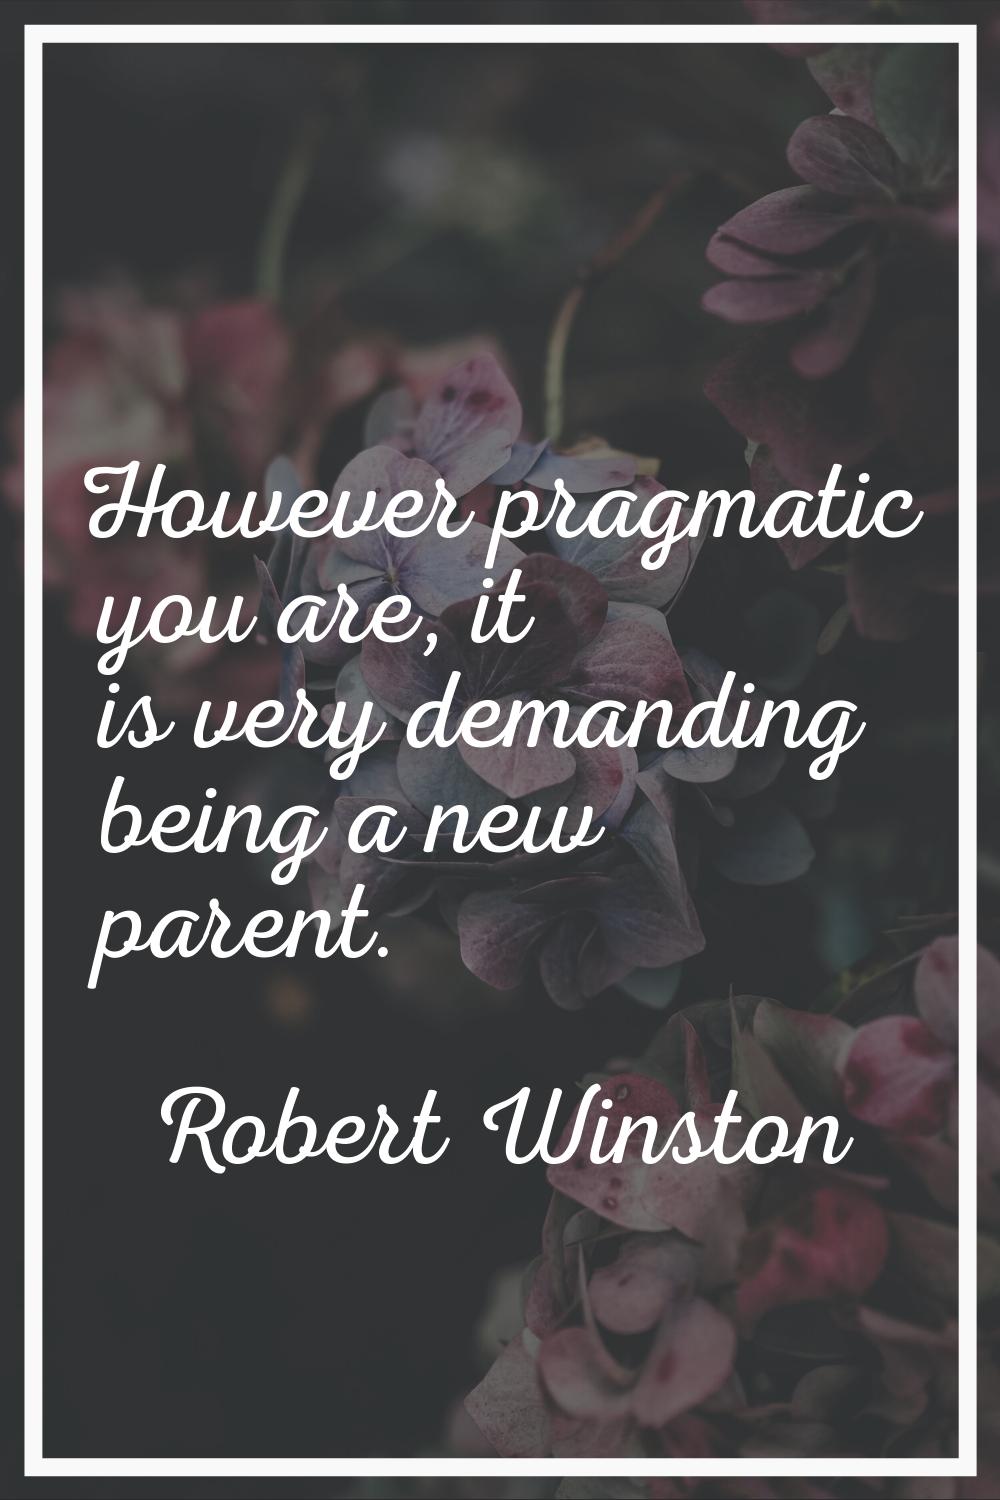 However pragmatic you are, it is very demanding being a new parent.